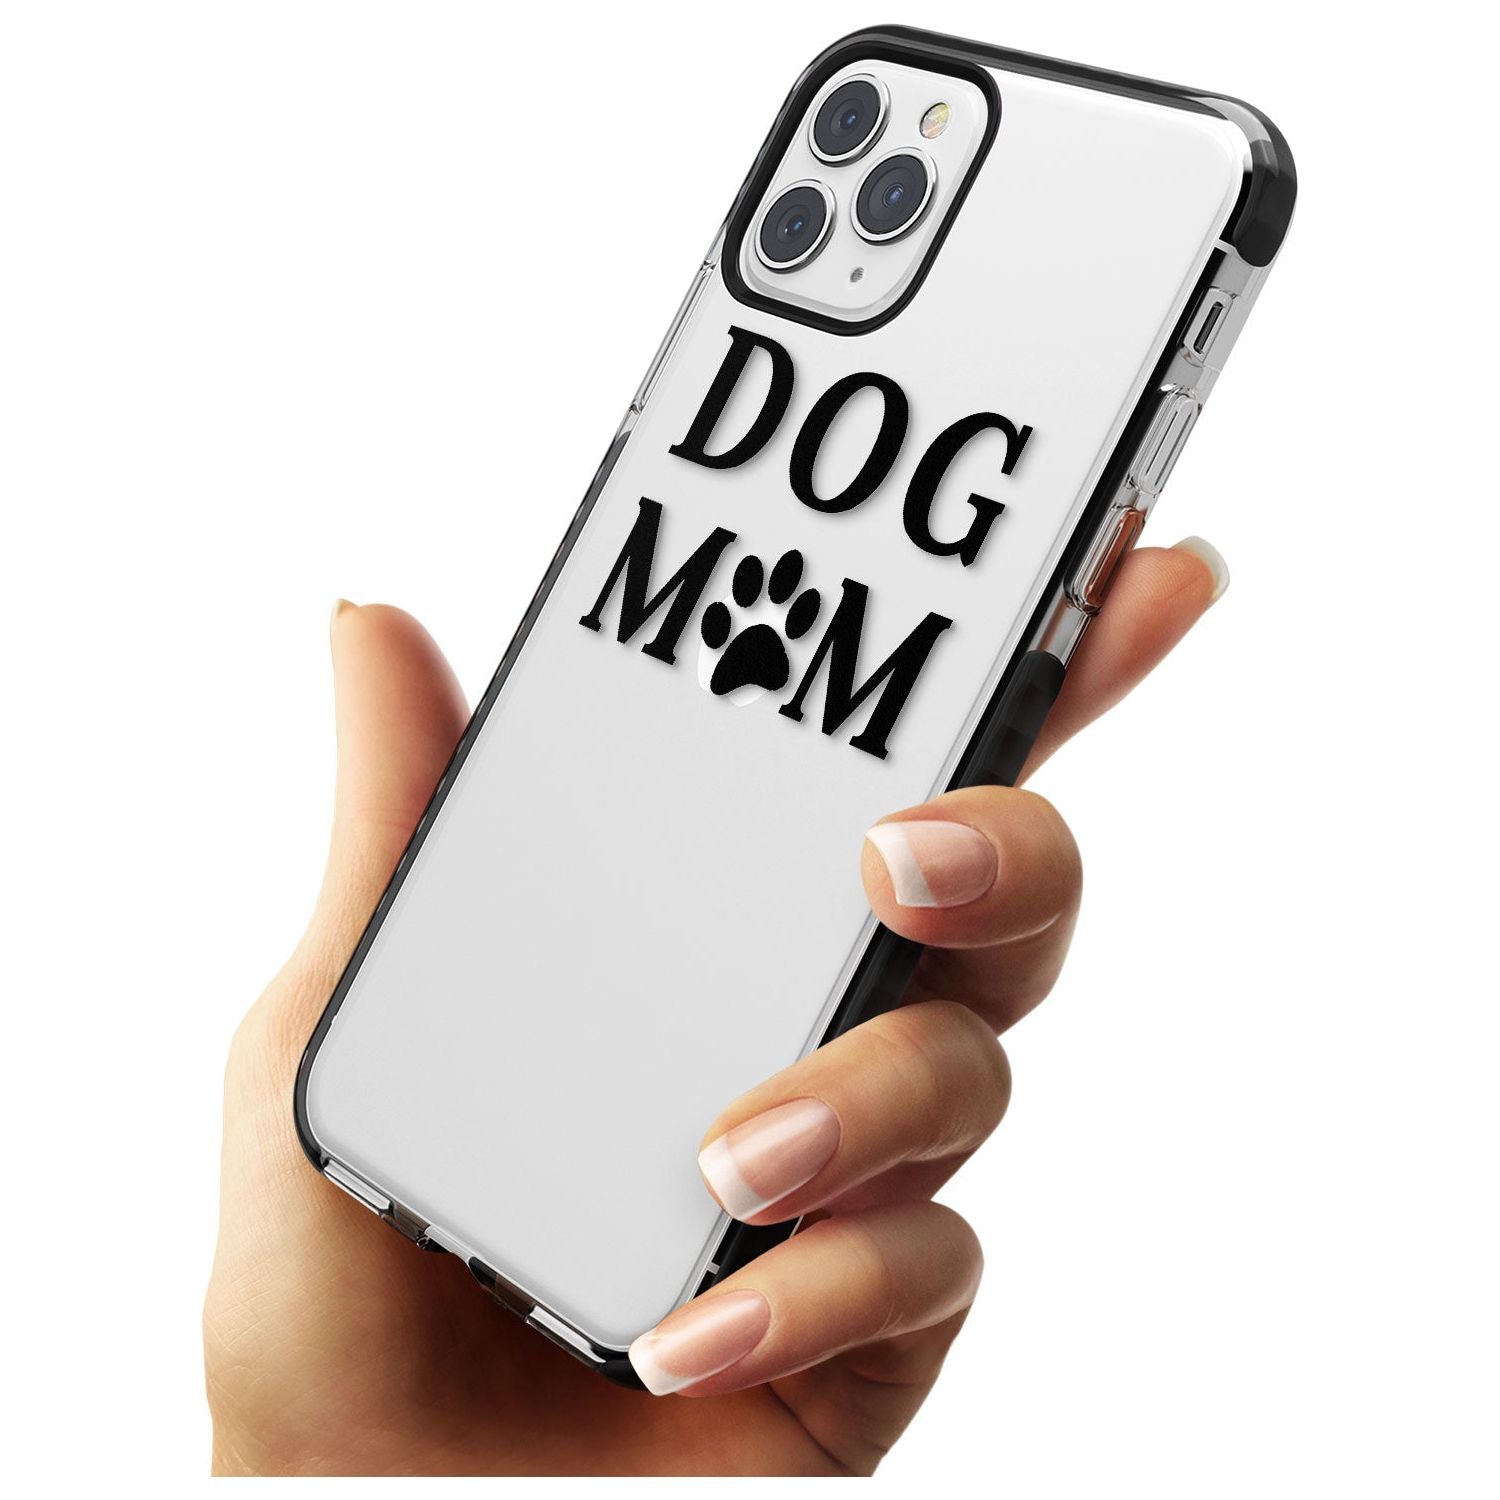 Dog Mom Paw Print Black Impact Phone Case for iPhone 11 Pro Max